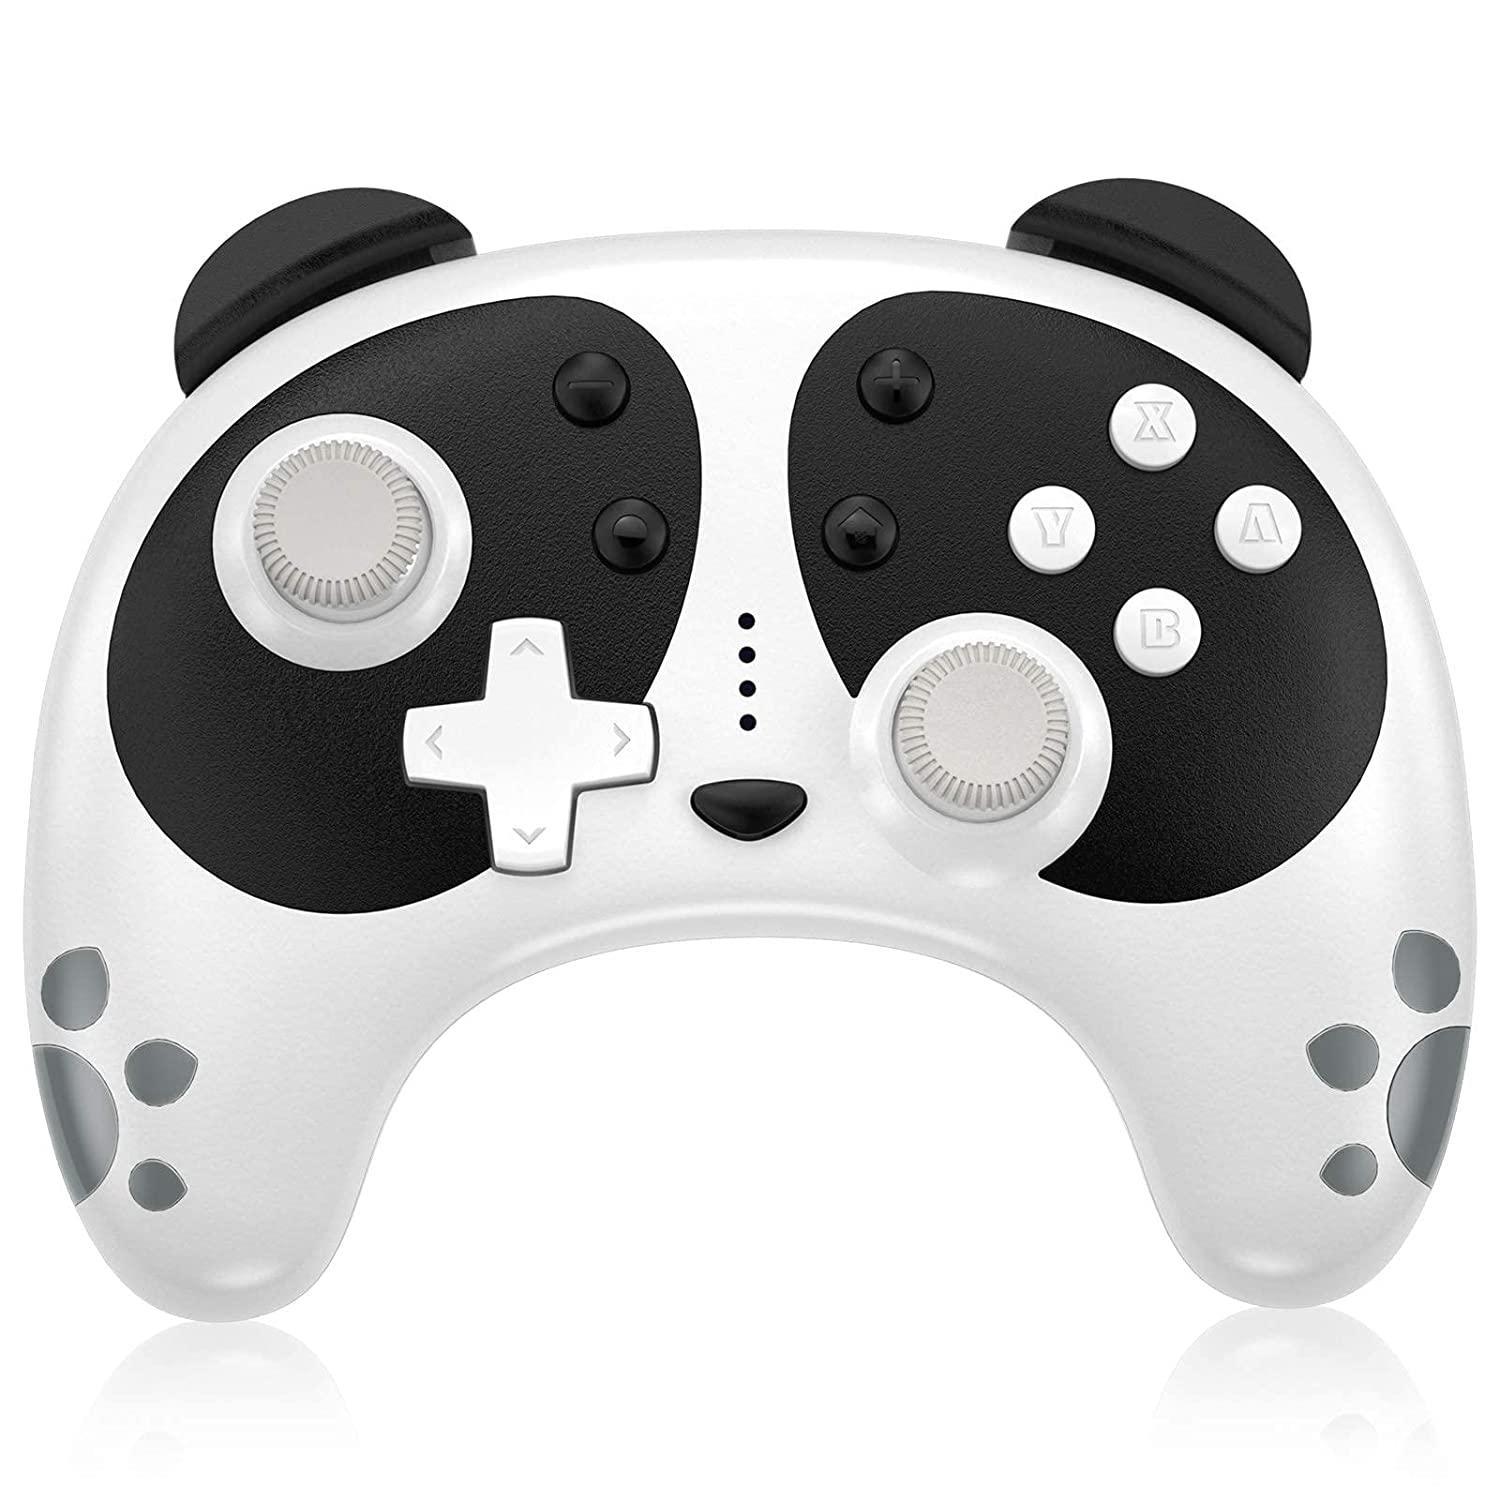 Wireless Controller for Nintendo Switch, Panda Cute Switch Pro Controller Compatible with Switch Lite/PC with NFC Wake-up Function, Support Motion Control Turbo Vibration